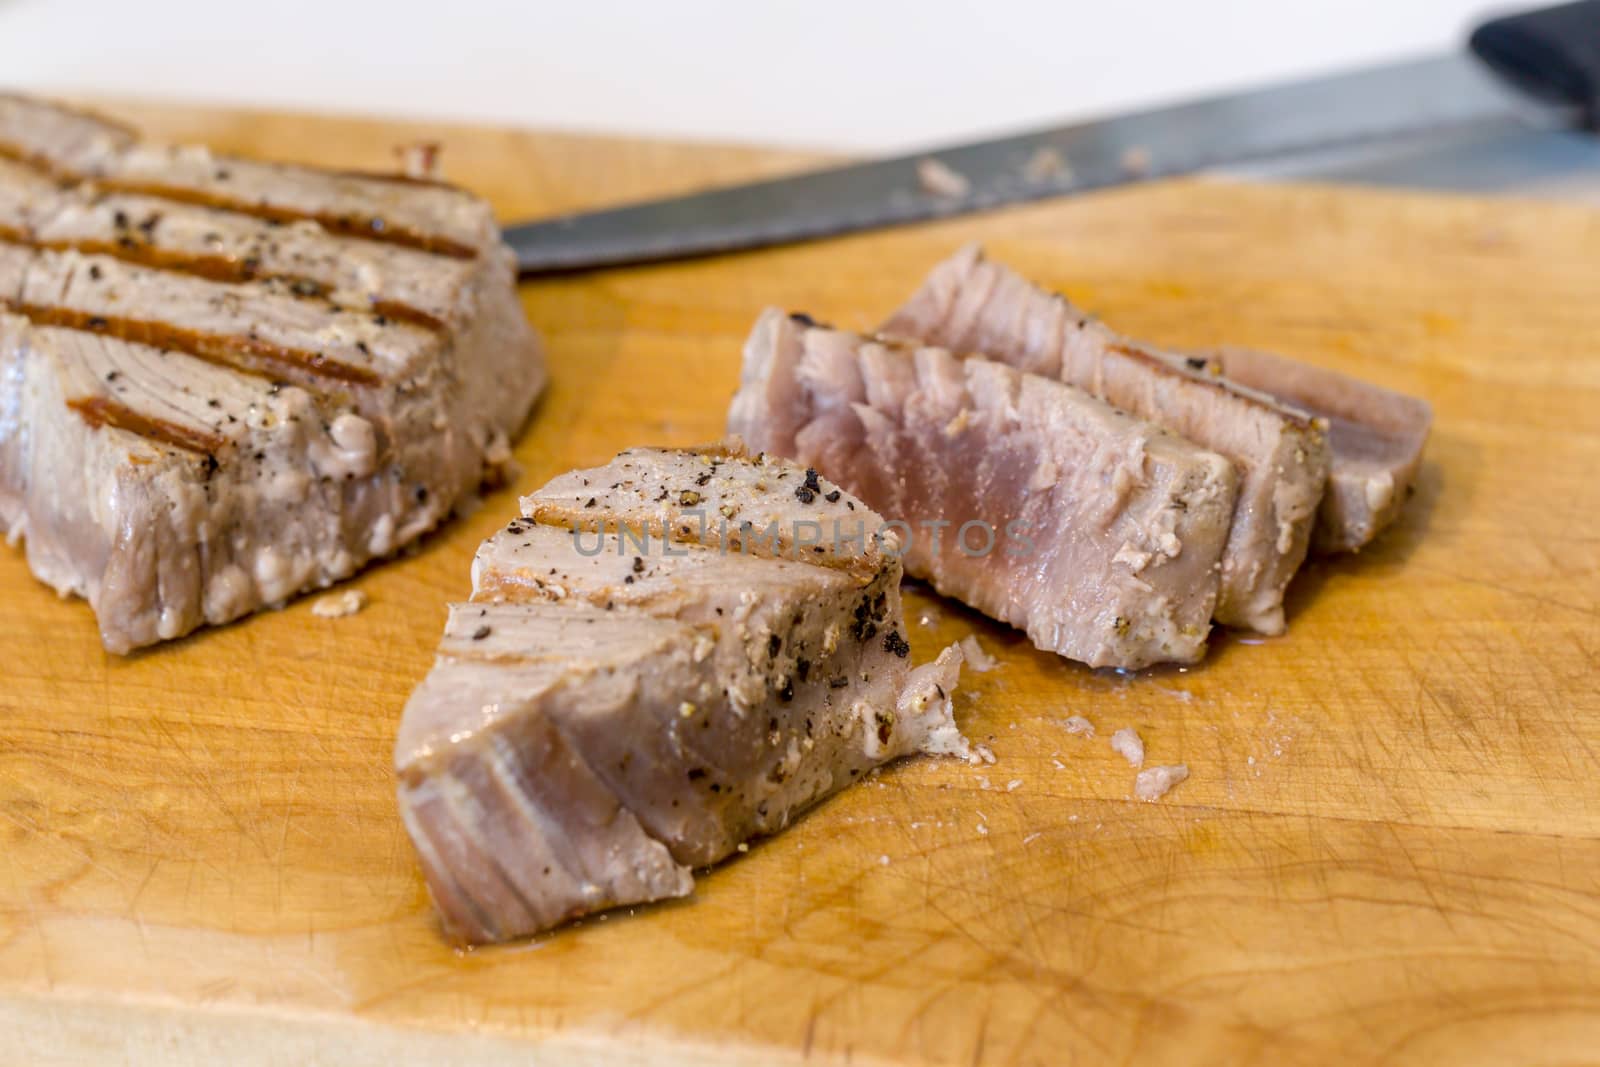 Chargrilled, seasoned tuna steaks cooked and sliced on a wooden chopping board